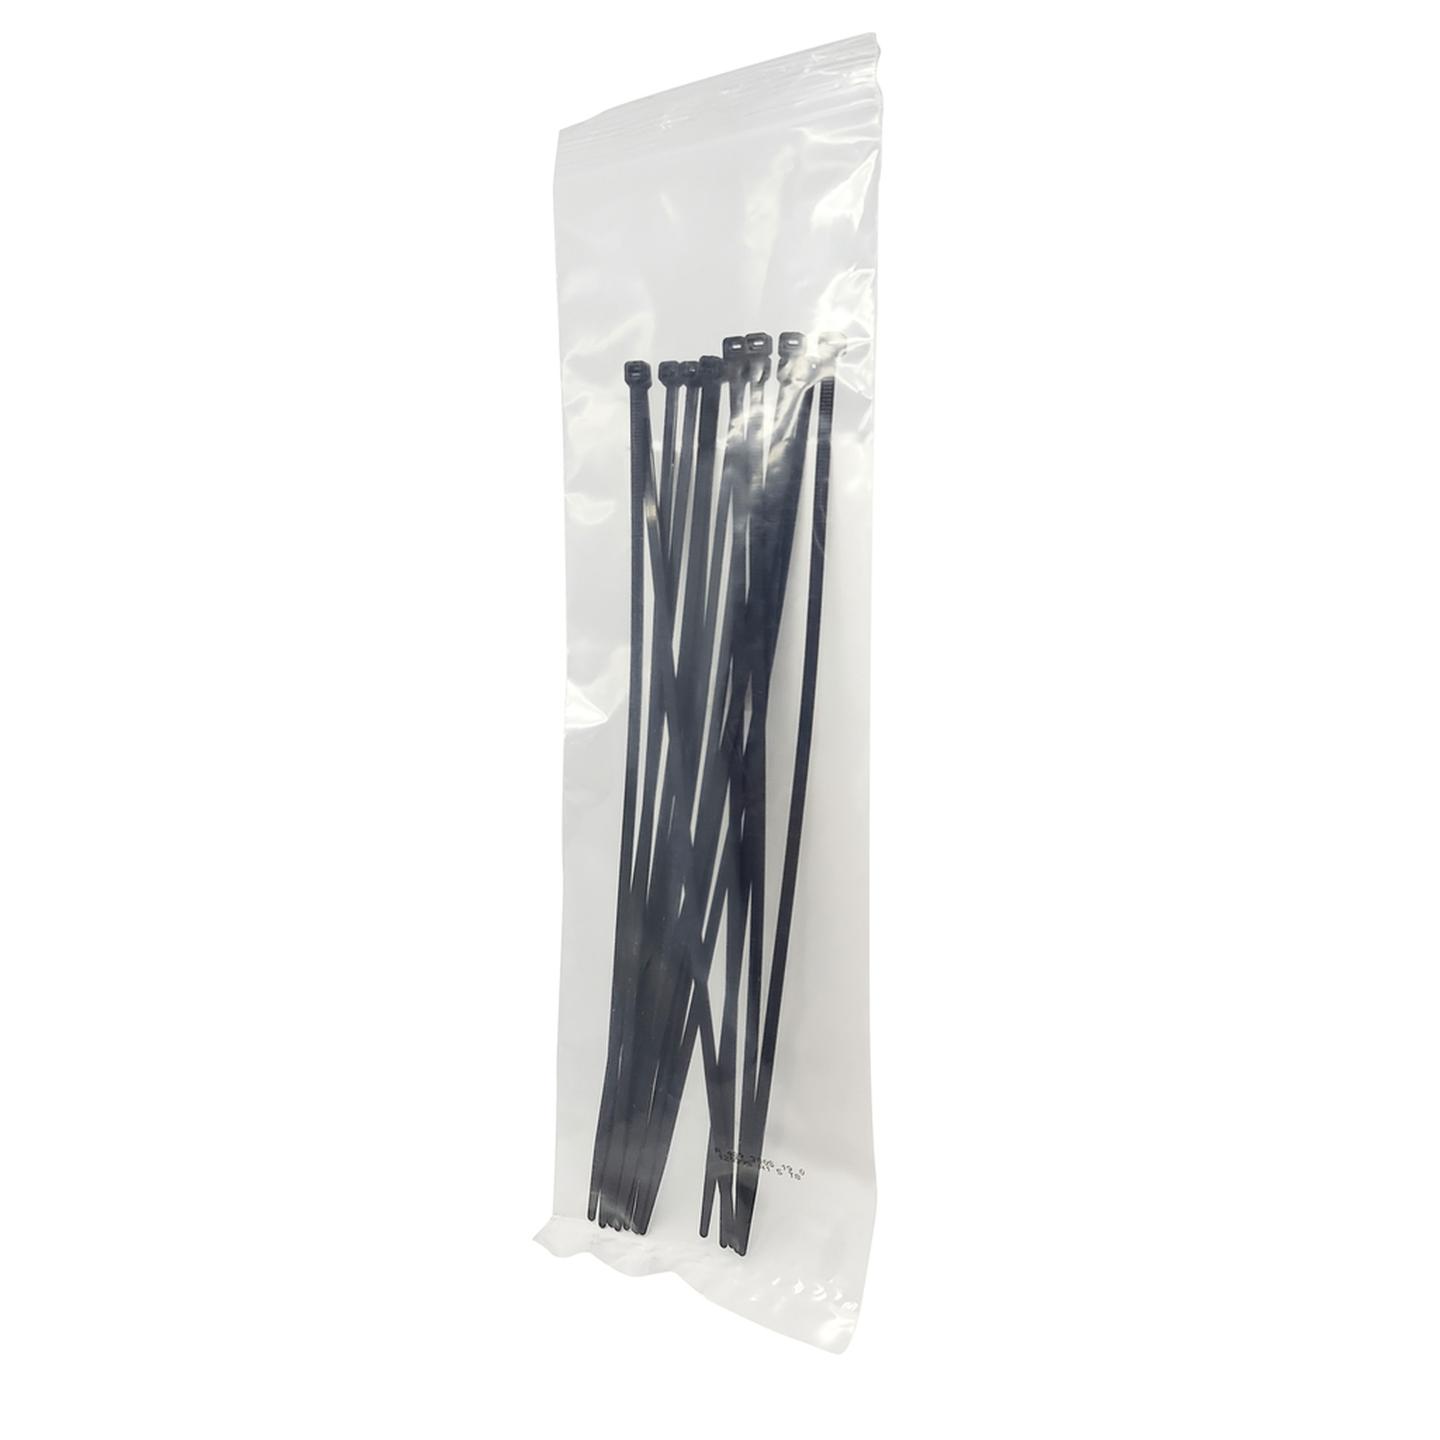 Cable Tie 300mm x 4.8mm pack of 15